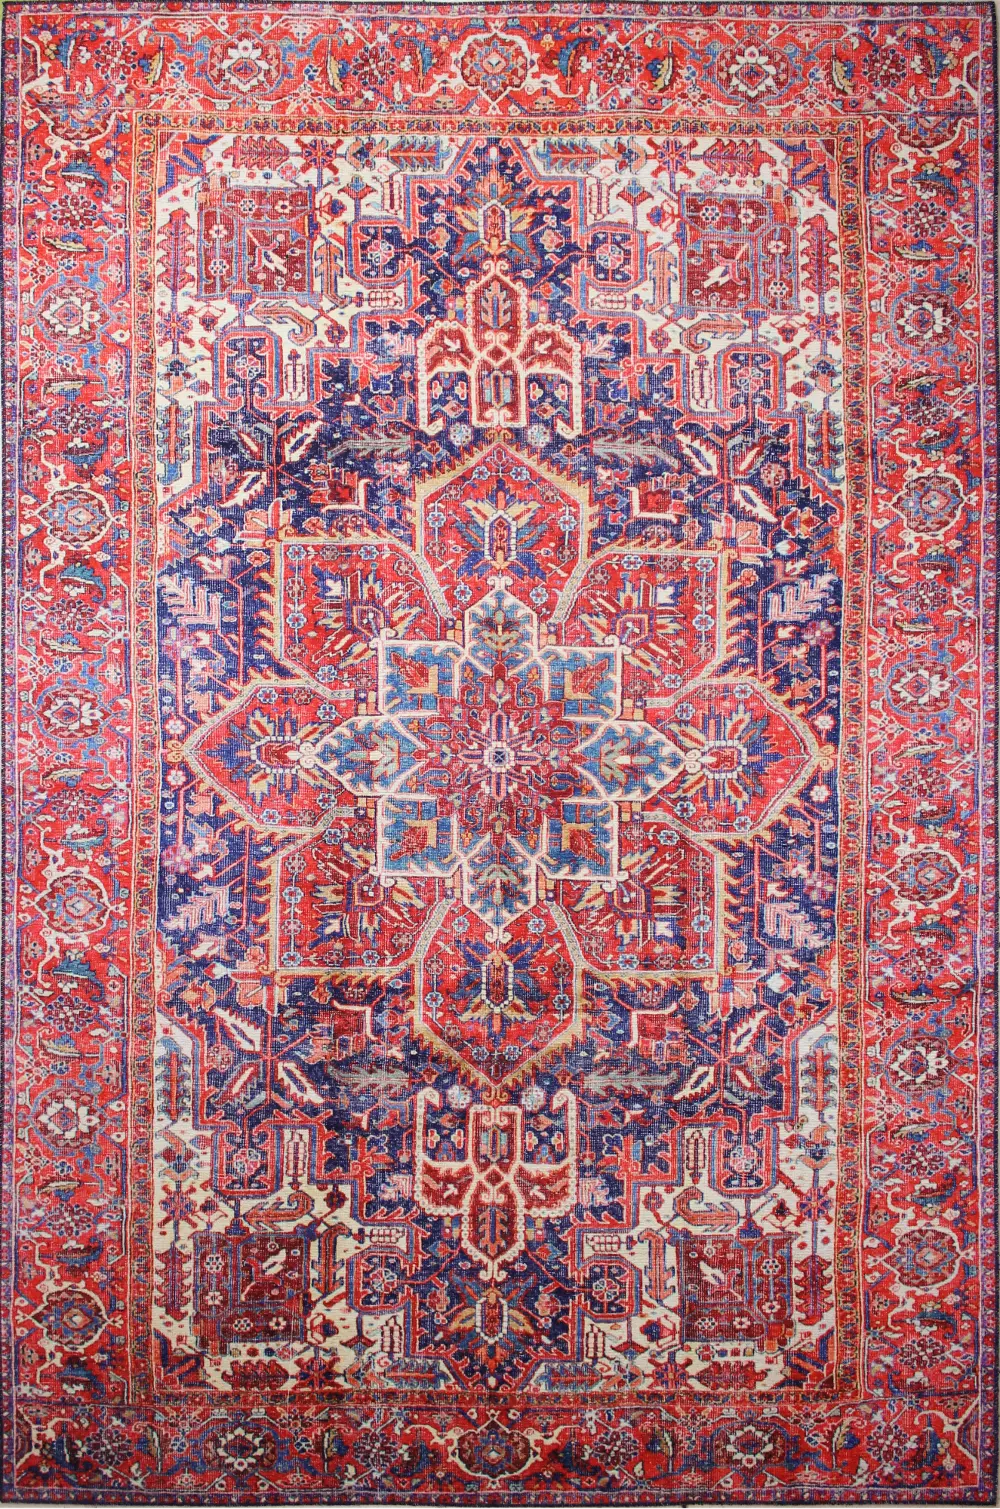 I166-DKBL-4X6-NR103 4 x 6 Small Traditional Zacharie Blue and Red Area Rug - Impressions-1